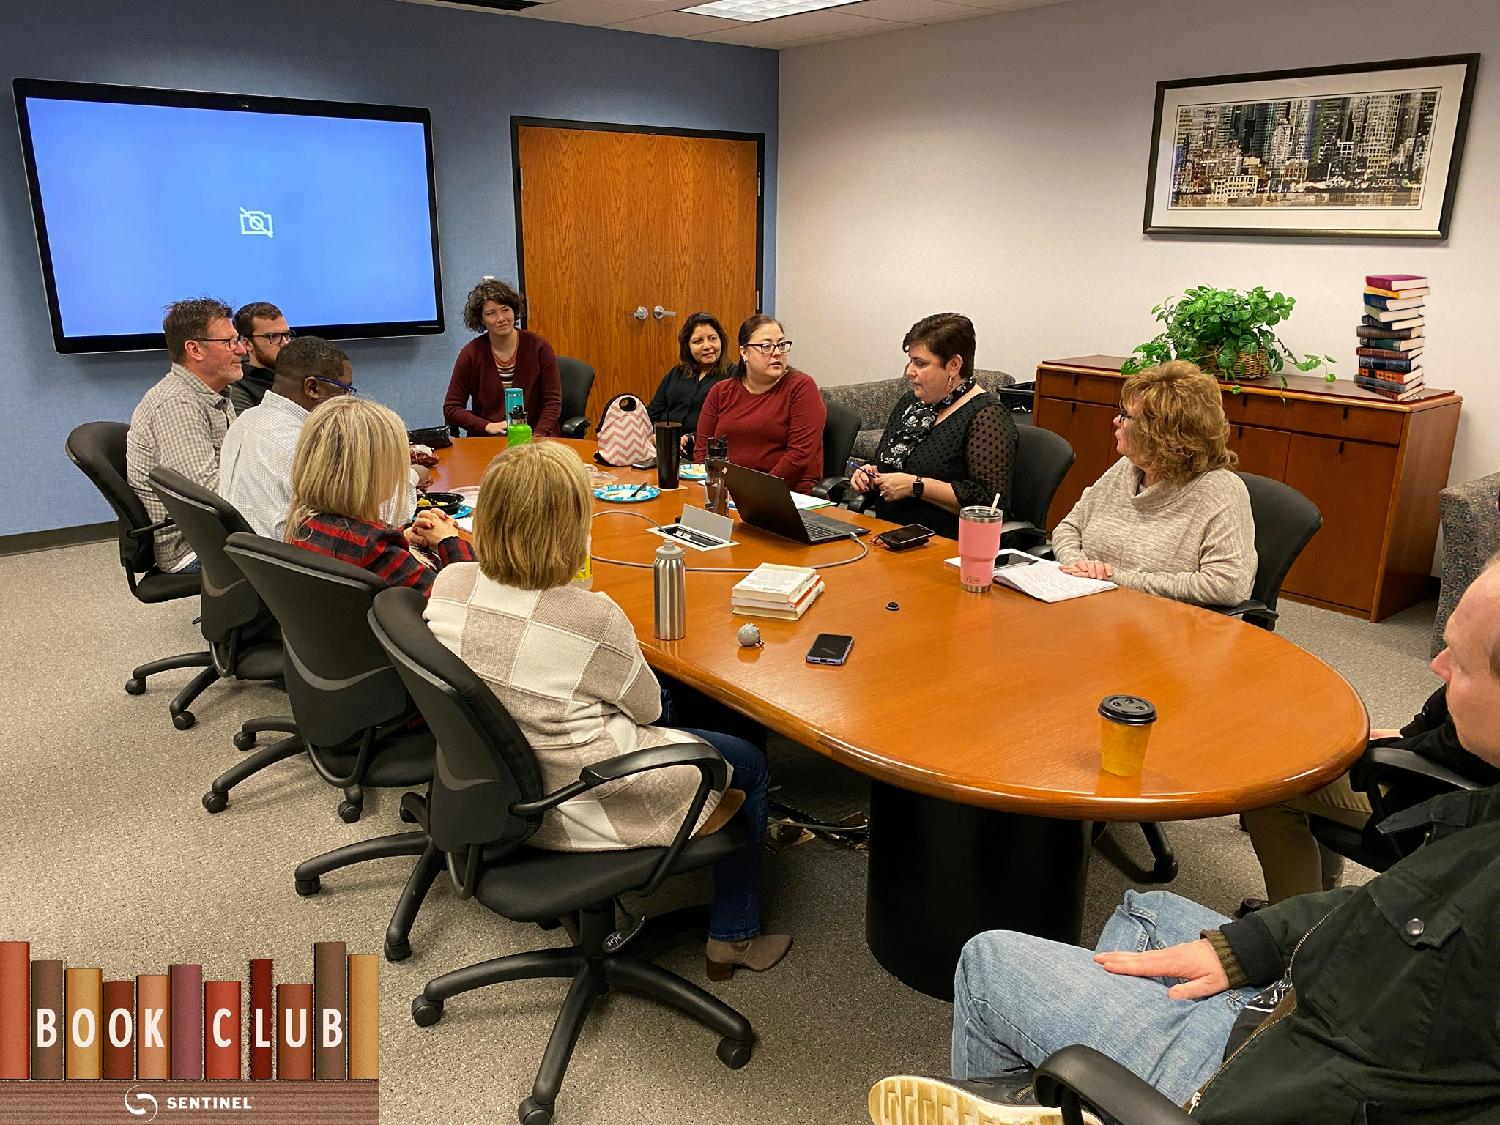 Sentinel Technologies believes in building community through our Book Club.